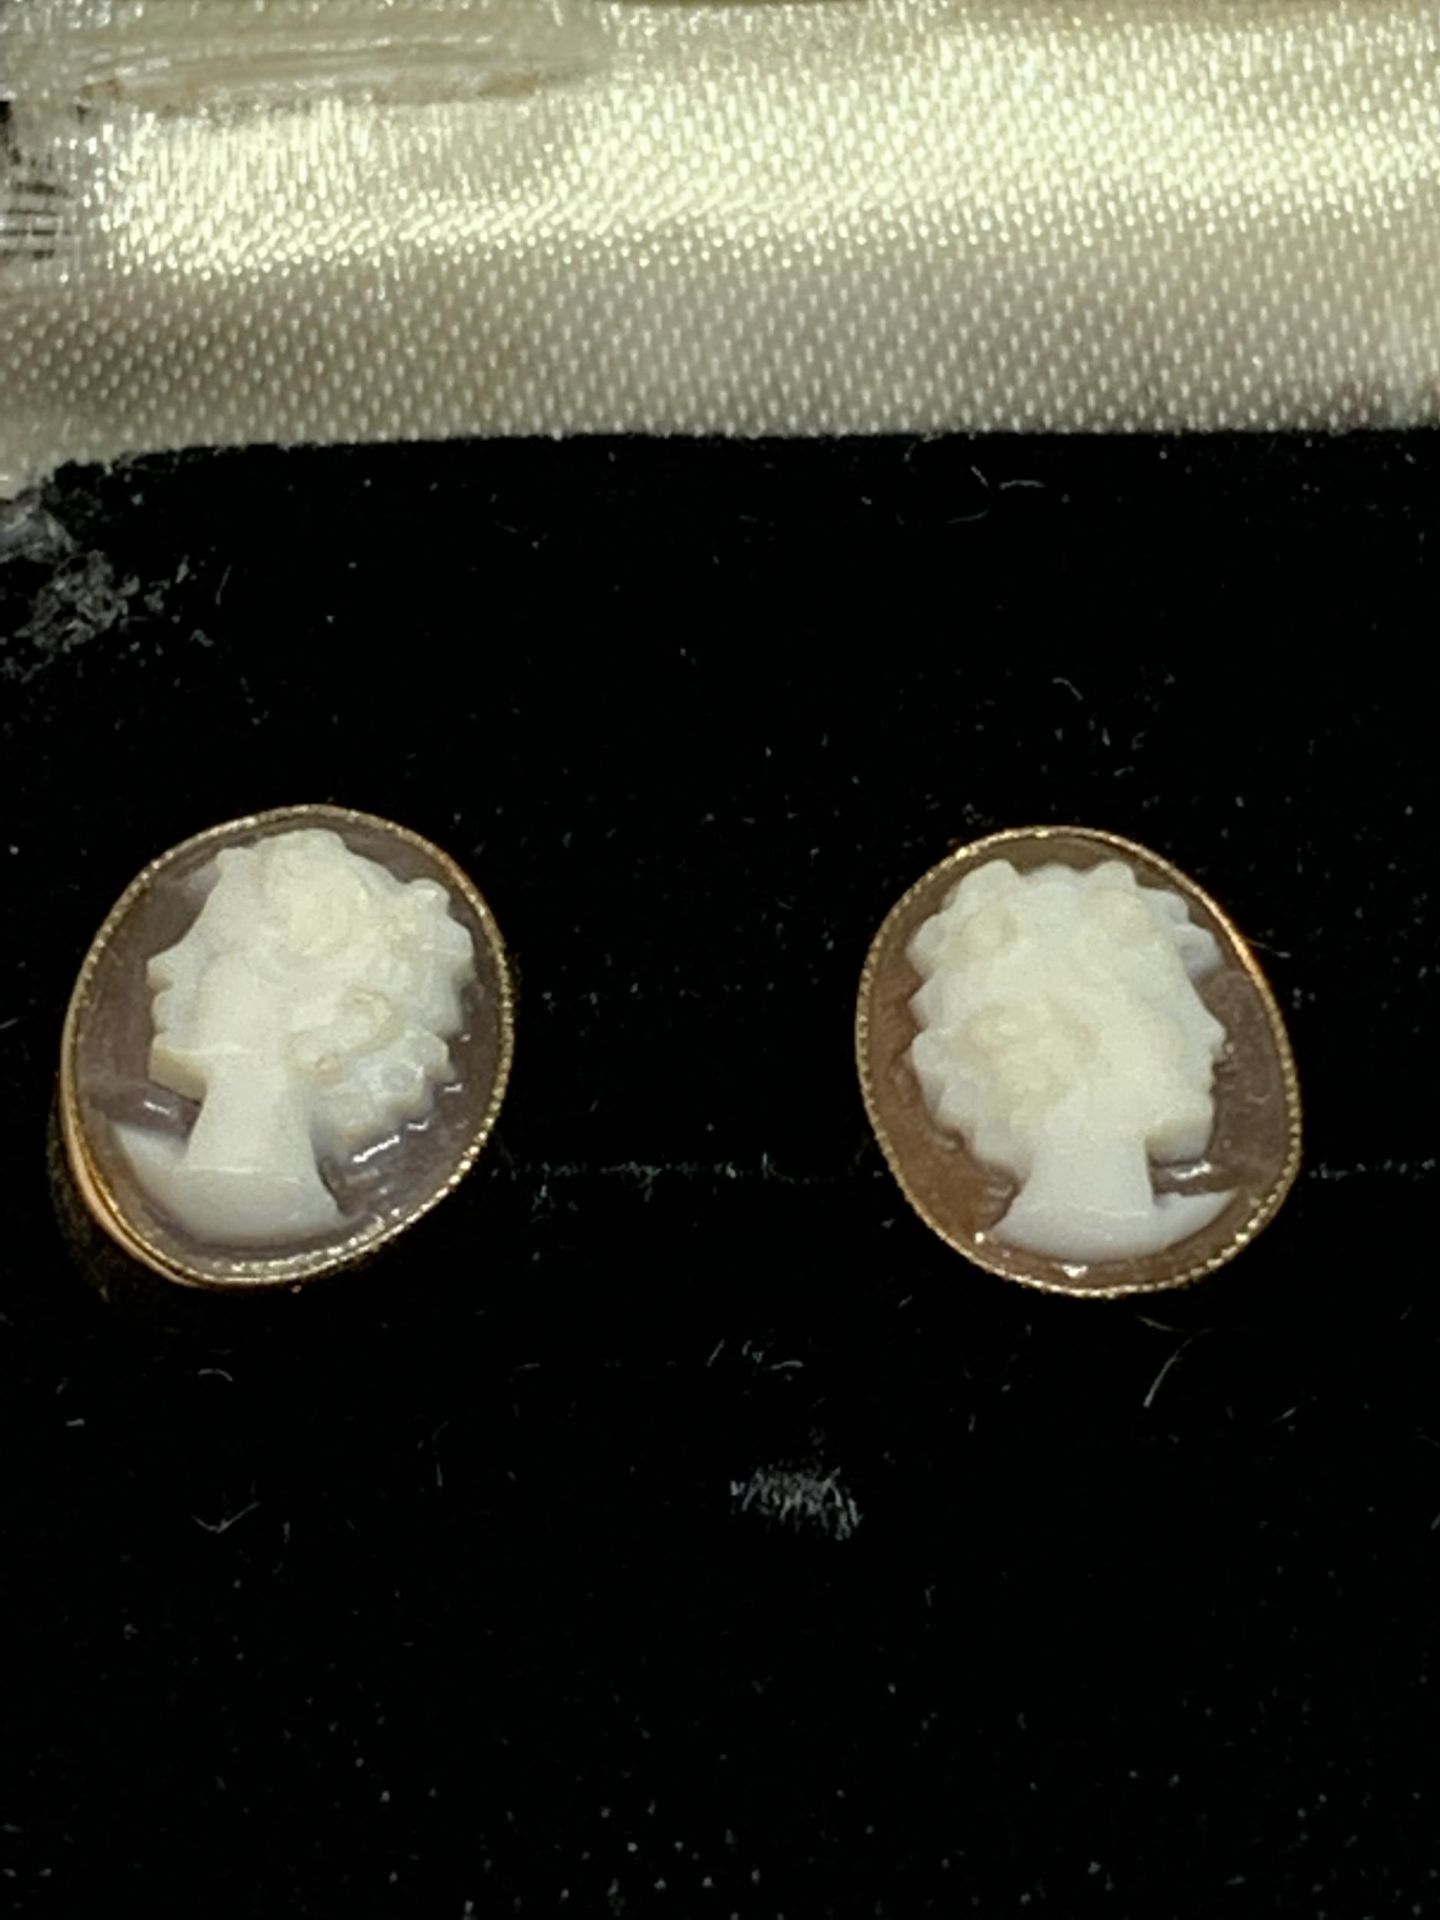 TWO PAIRS OF 9 CARAT GOLD EARRINGS TO INCLUDE CAMEOSAND CLEAR STONES IN PRESENTATION BOXES - Image 2 of 3